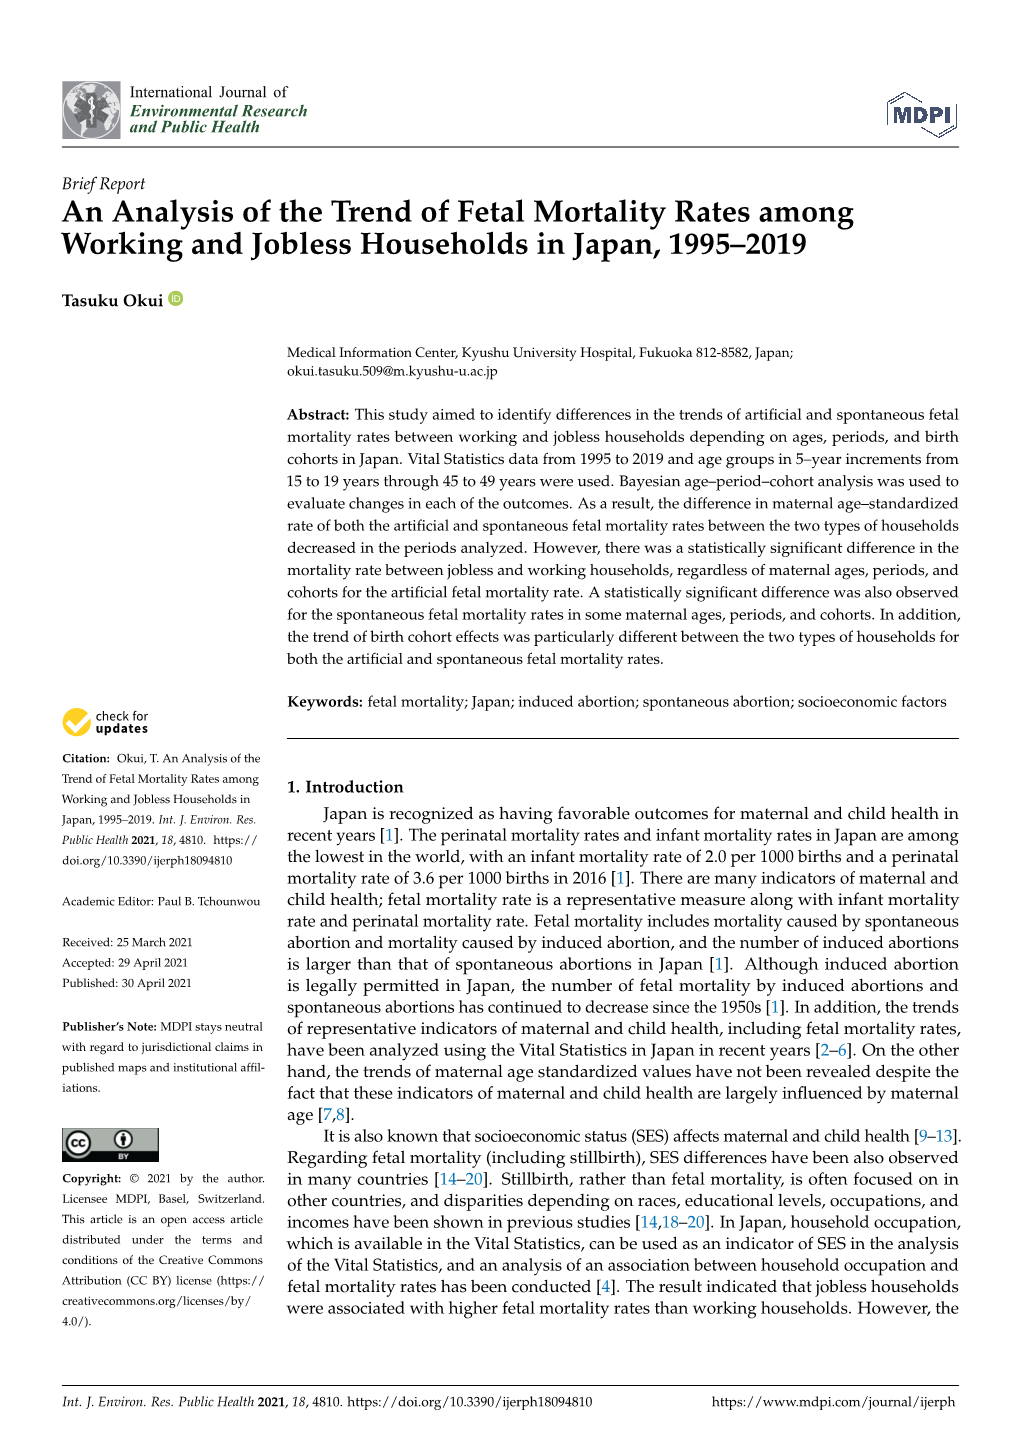 An Analysis of the Trend of Fetal Mortality Rates Among Working and Jobless Households in Japan, 1995–2019